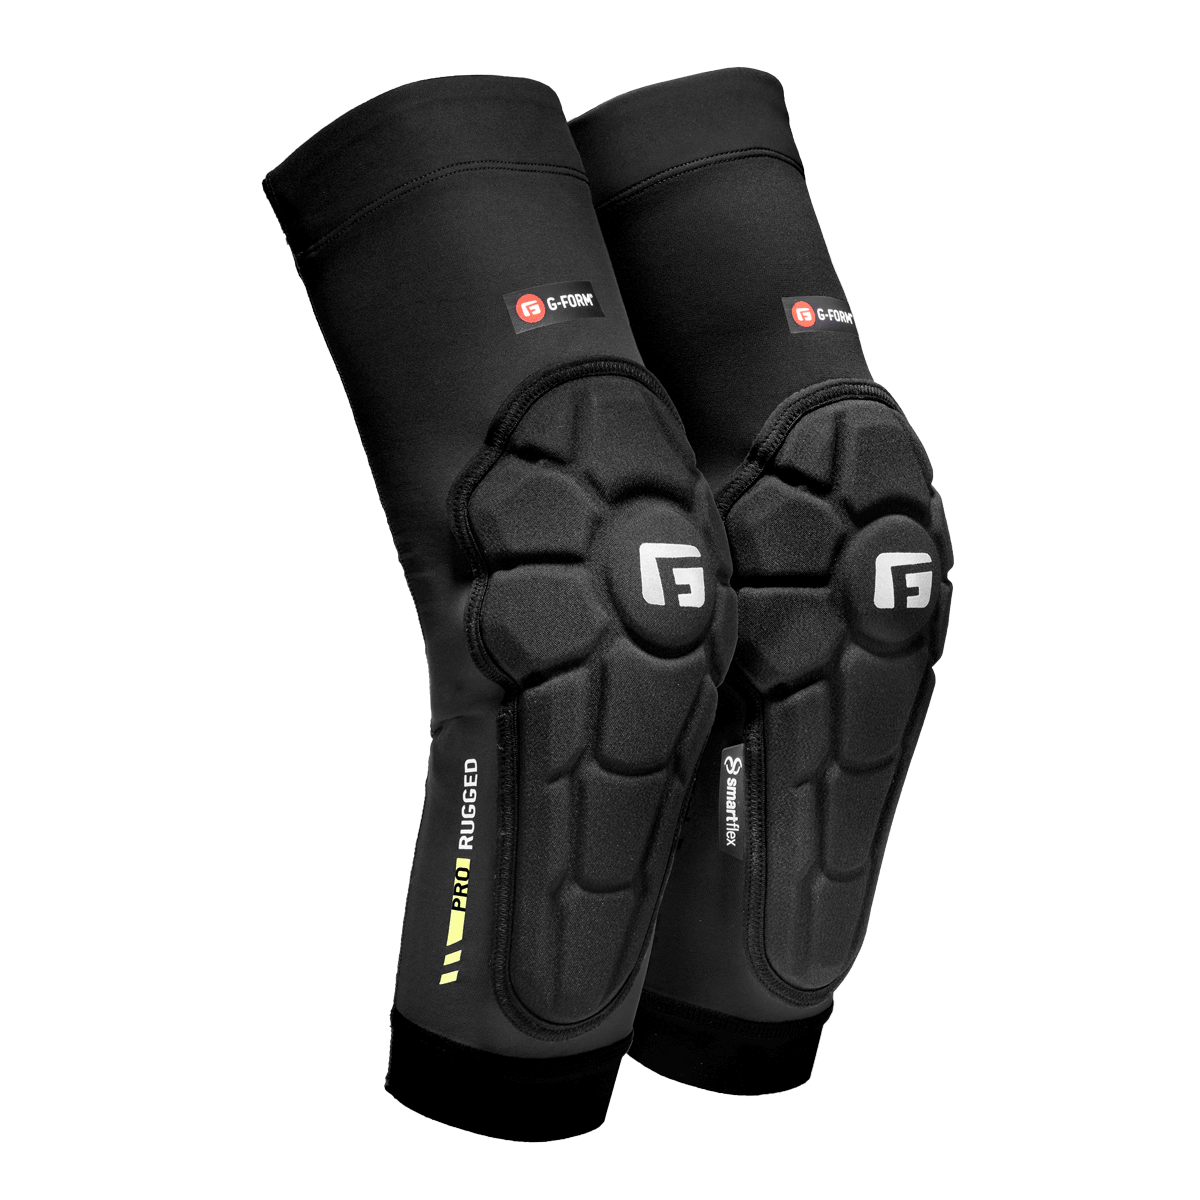 Pro-Rugged 2 Elbow Guard Pads Protections Machine Washable Heavy Duty Tear Resistant Youth Adult